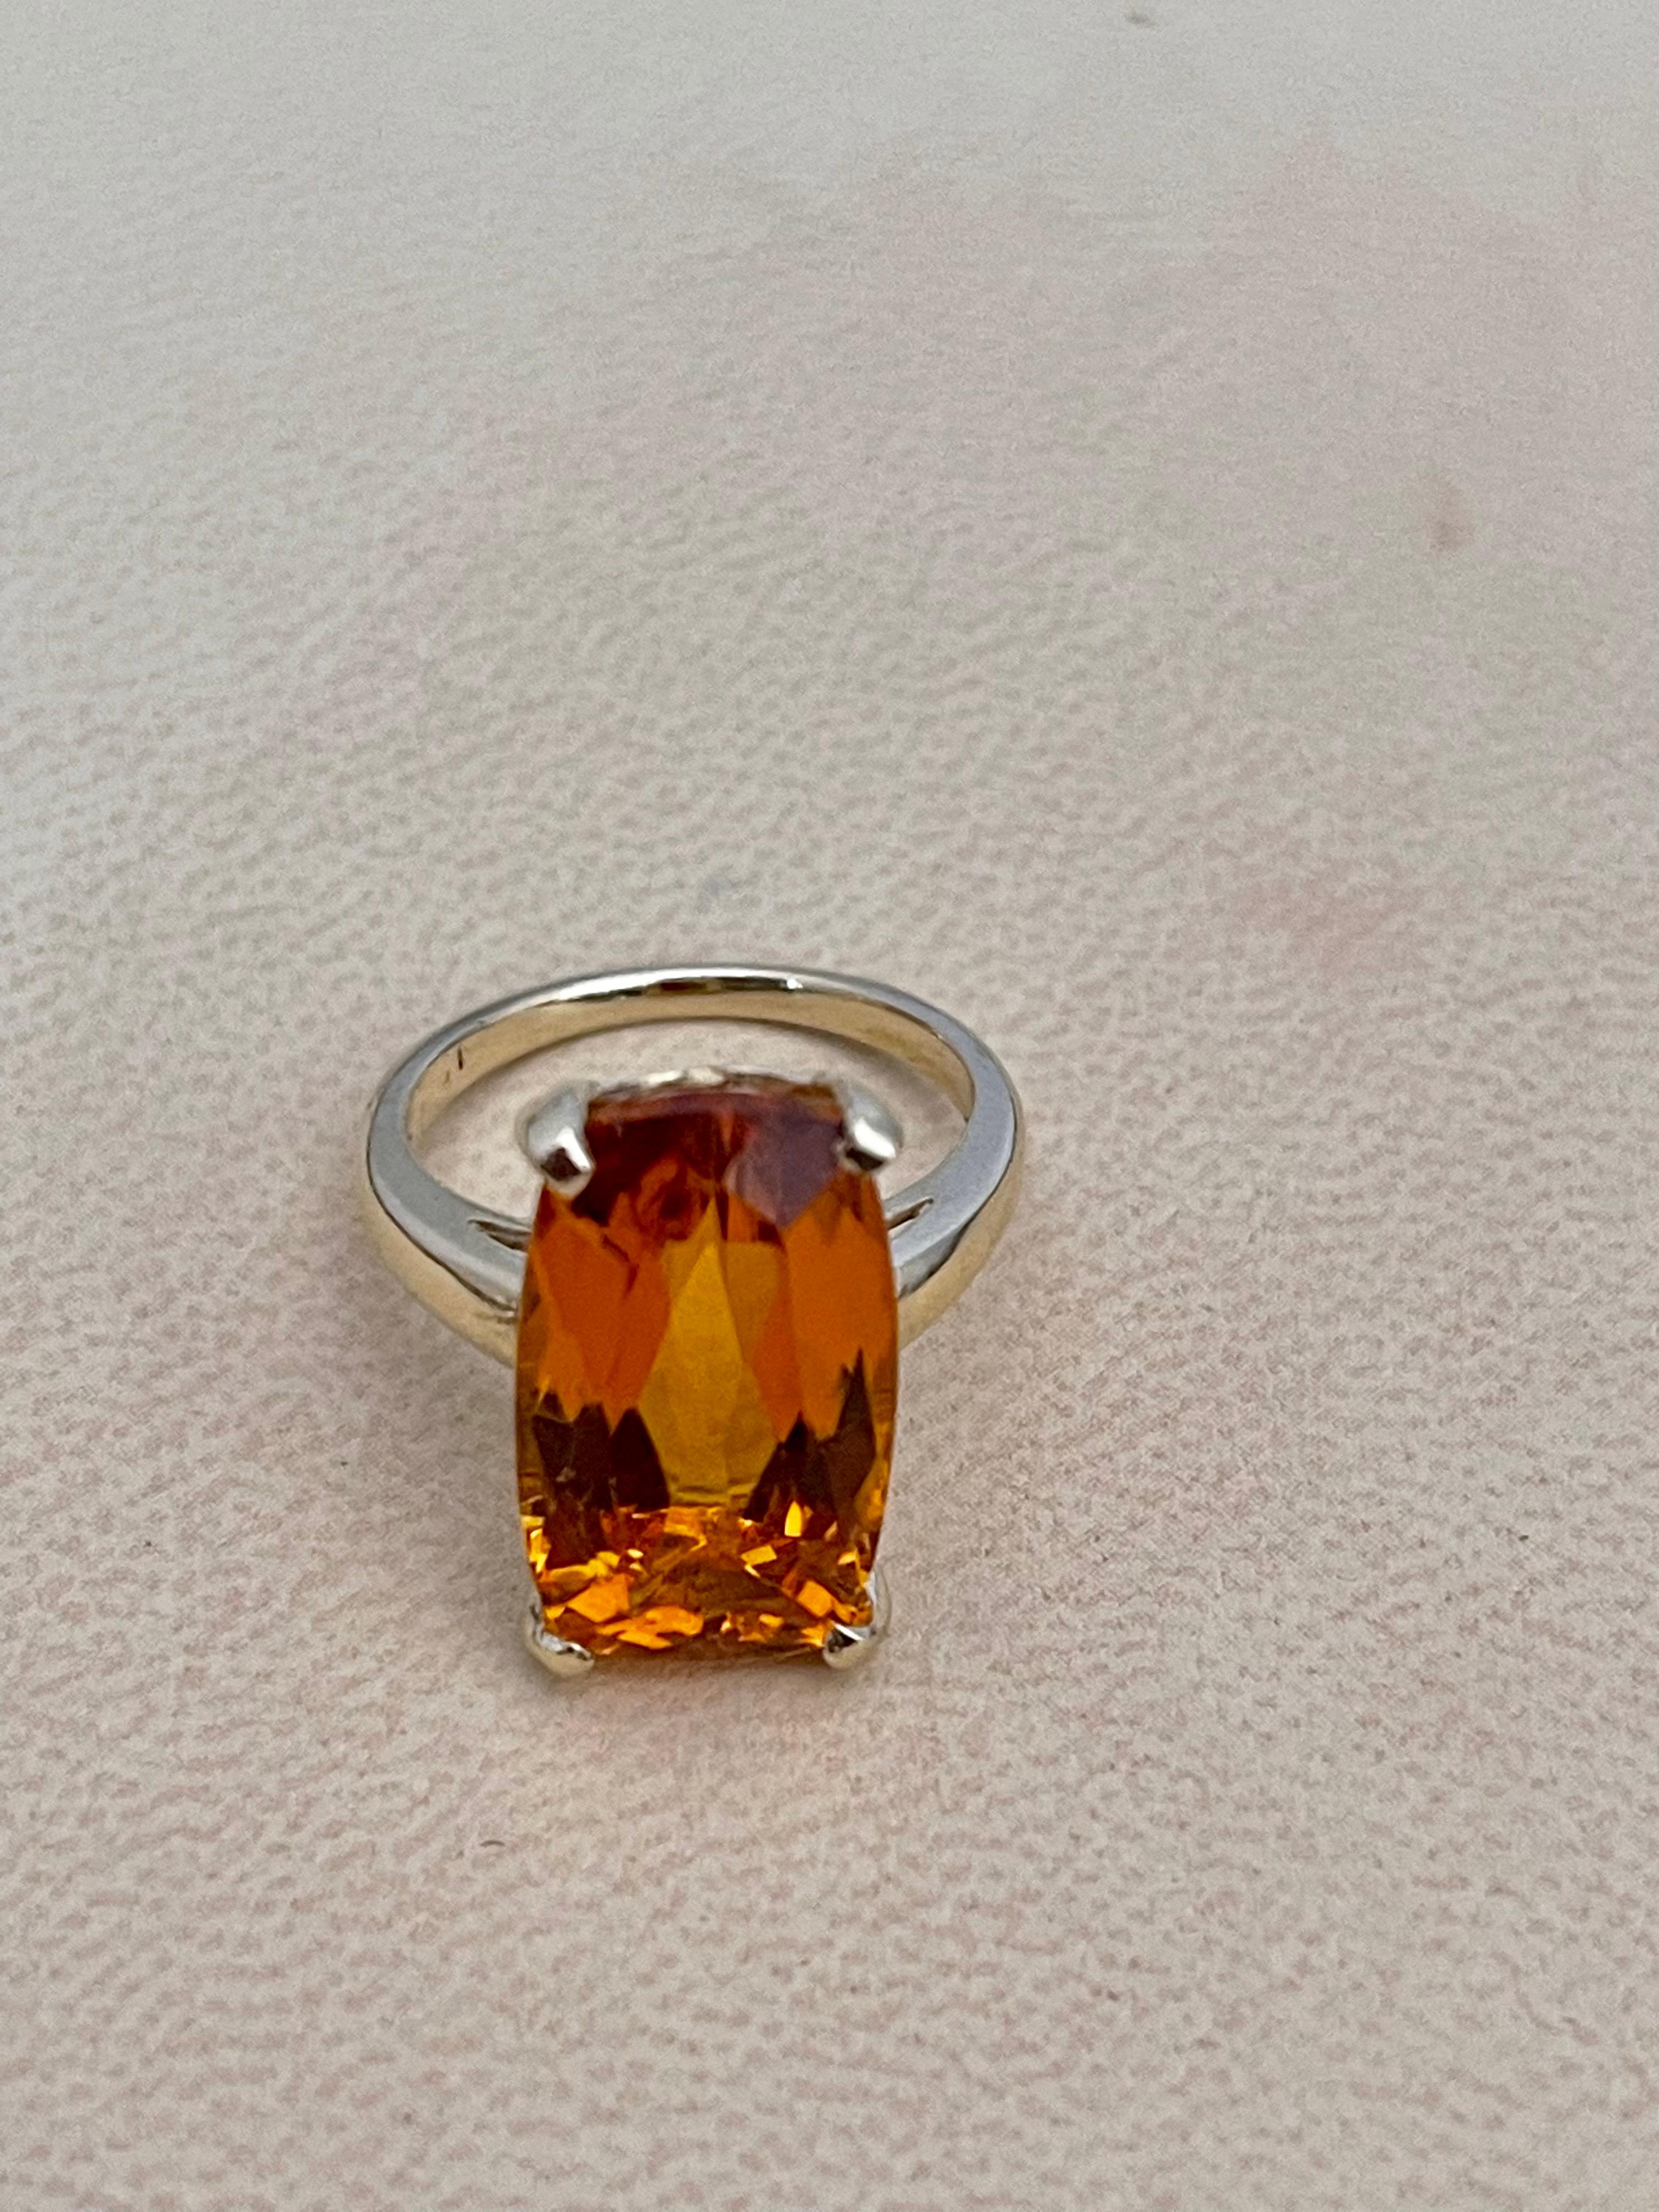 6 Carat Natural Long Cushion Shape Citrine Cocktail Ring in 14 Karat Yellow Gold For Sale 6